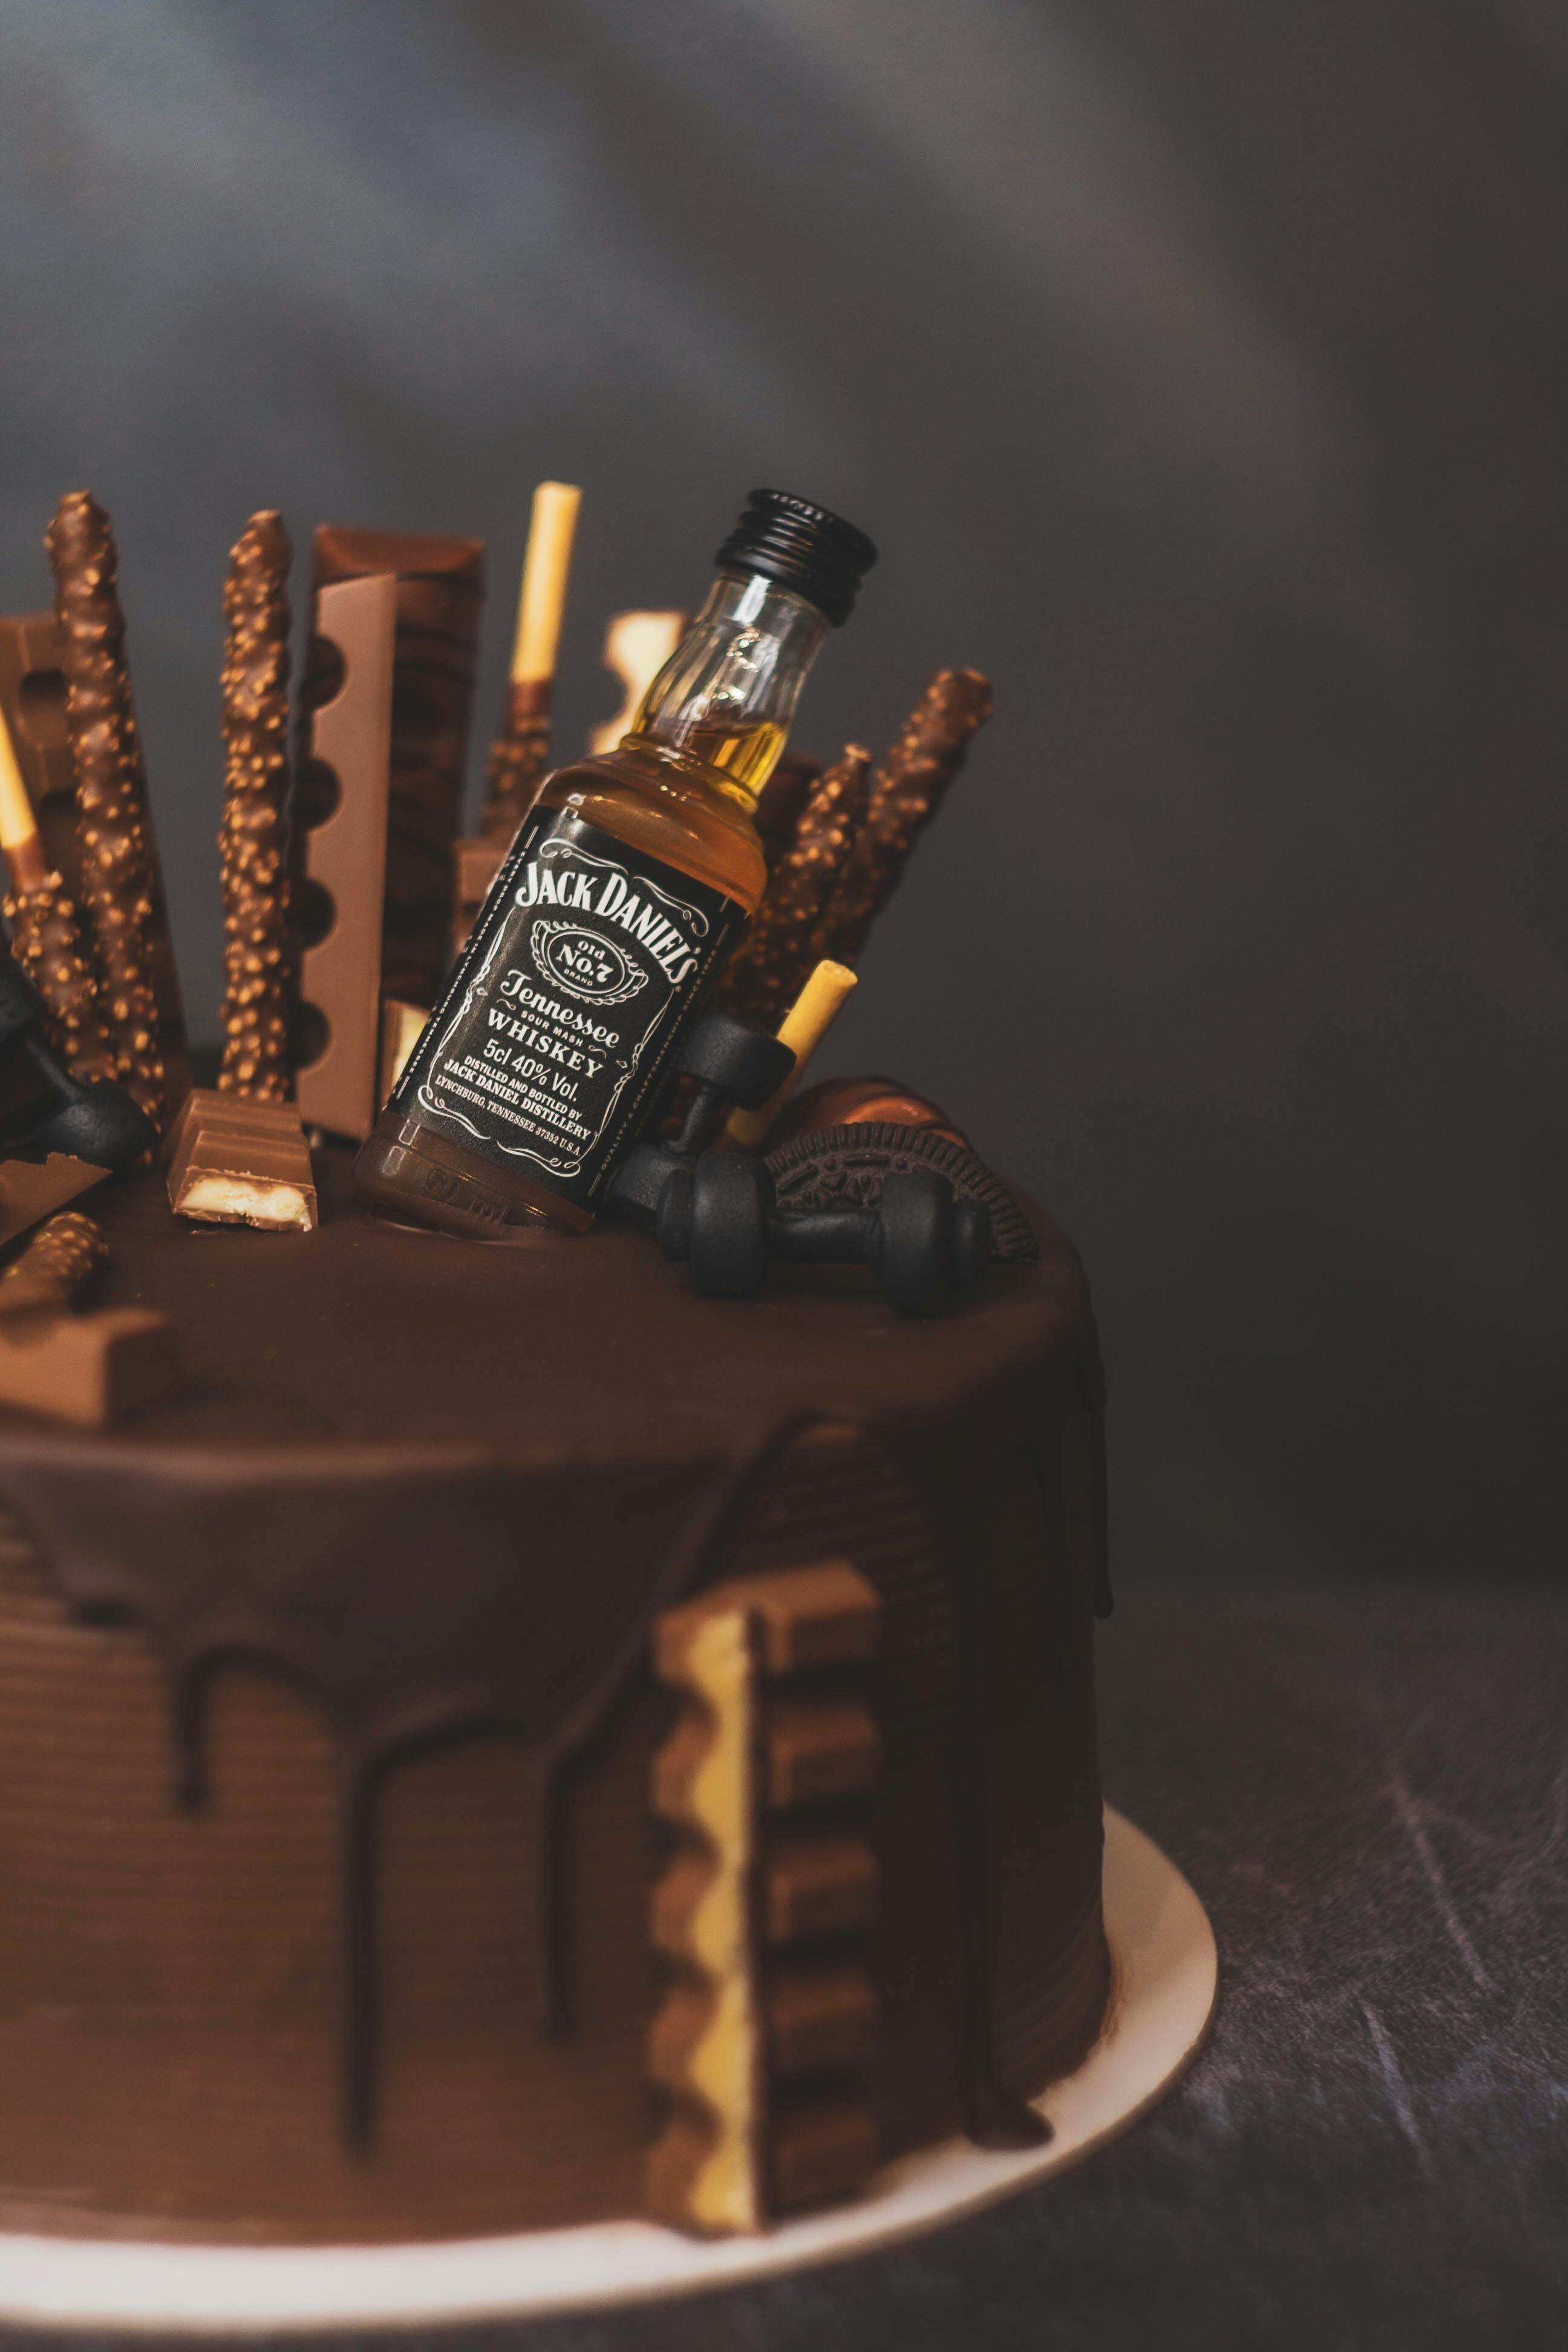 I baked this whiskey salted caramel cake (fully edible) with fake ice cubes  made of whisky gelatin and (drinkable😉) mini whiskey bottles : r/Baking